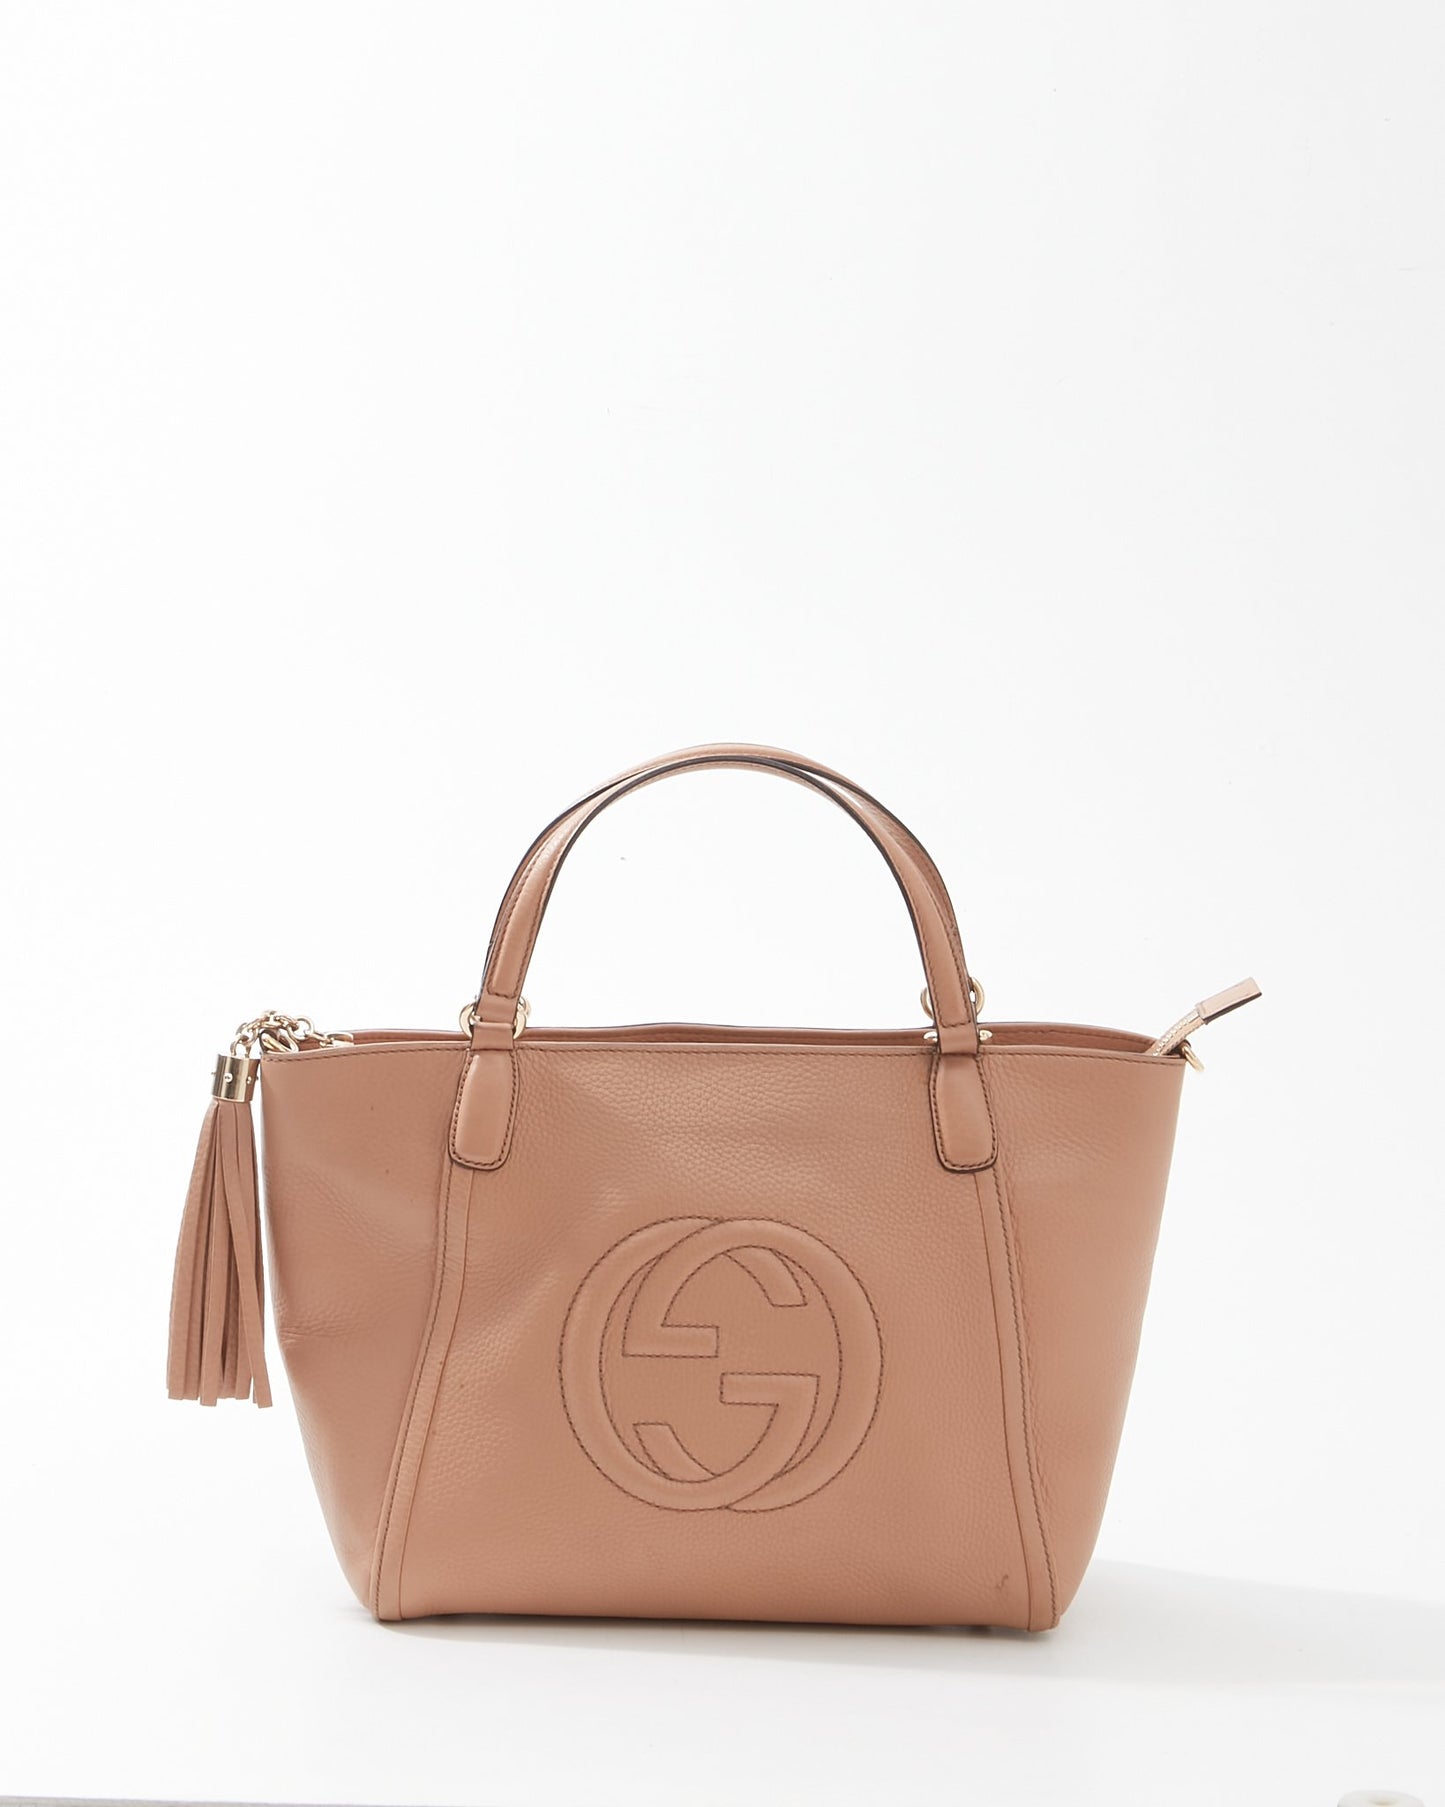 Gucci Nude Pebbled Leather Convertible Top Handle Bag